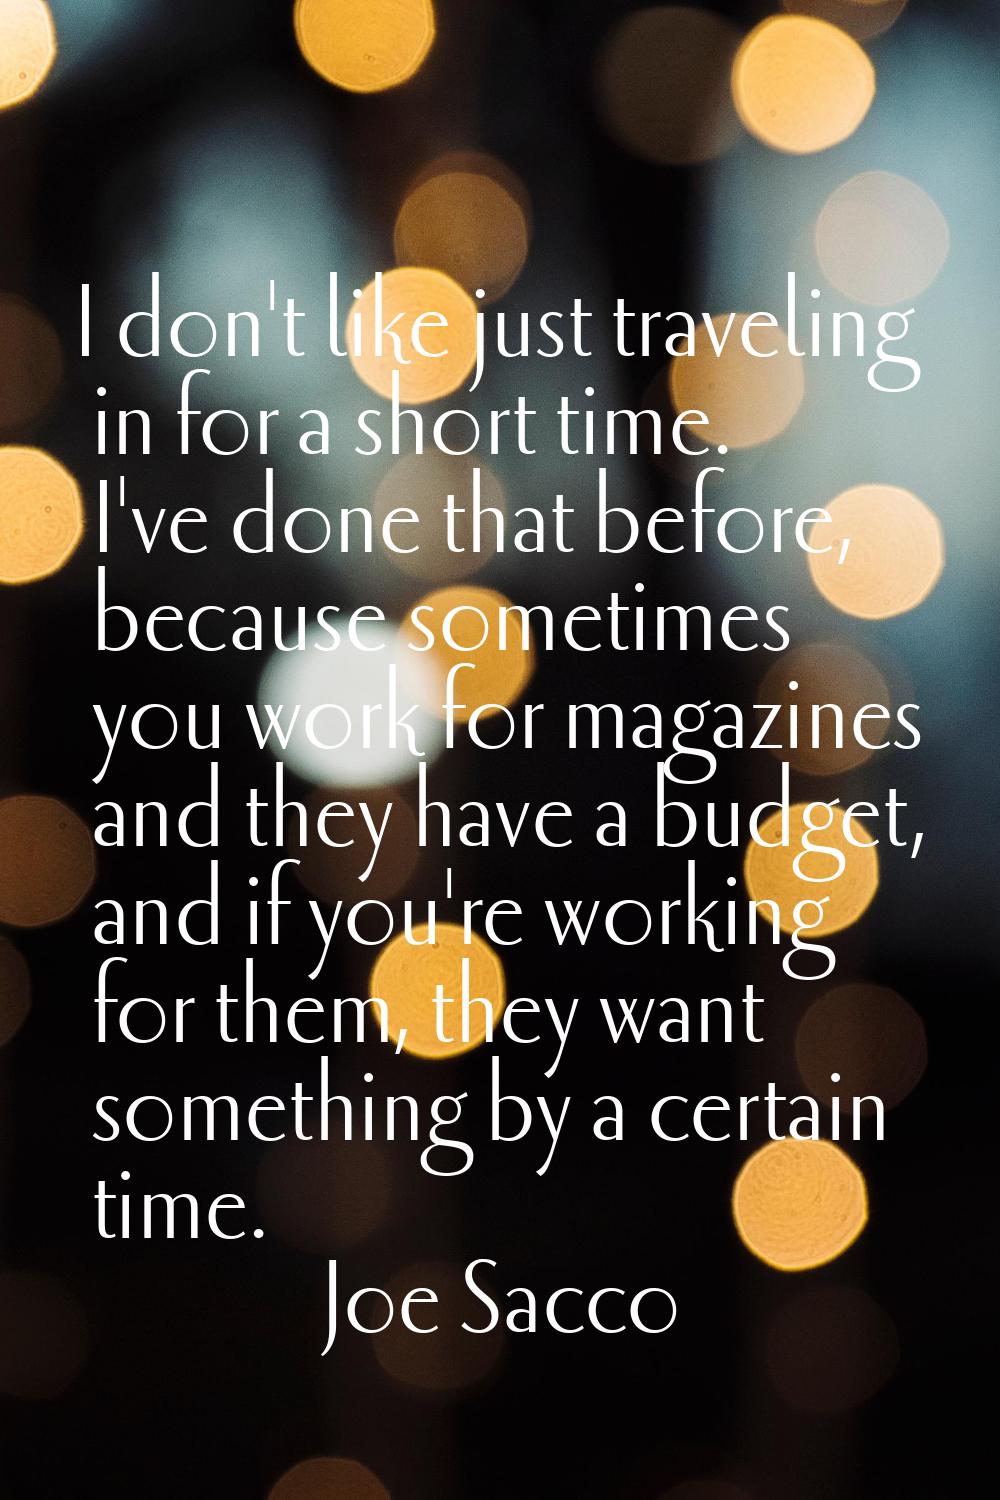 I don't like just traveling in for a short time. I've done that before, because sometimes you work 